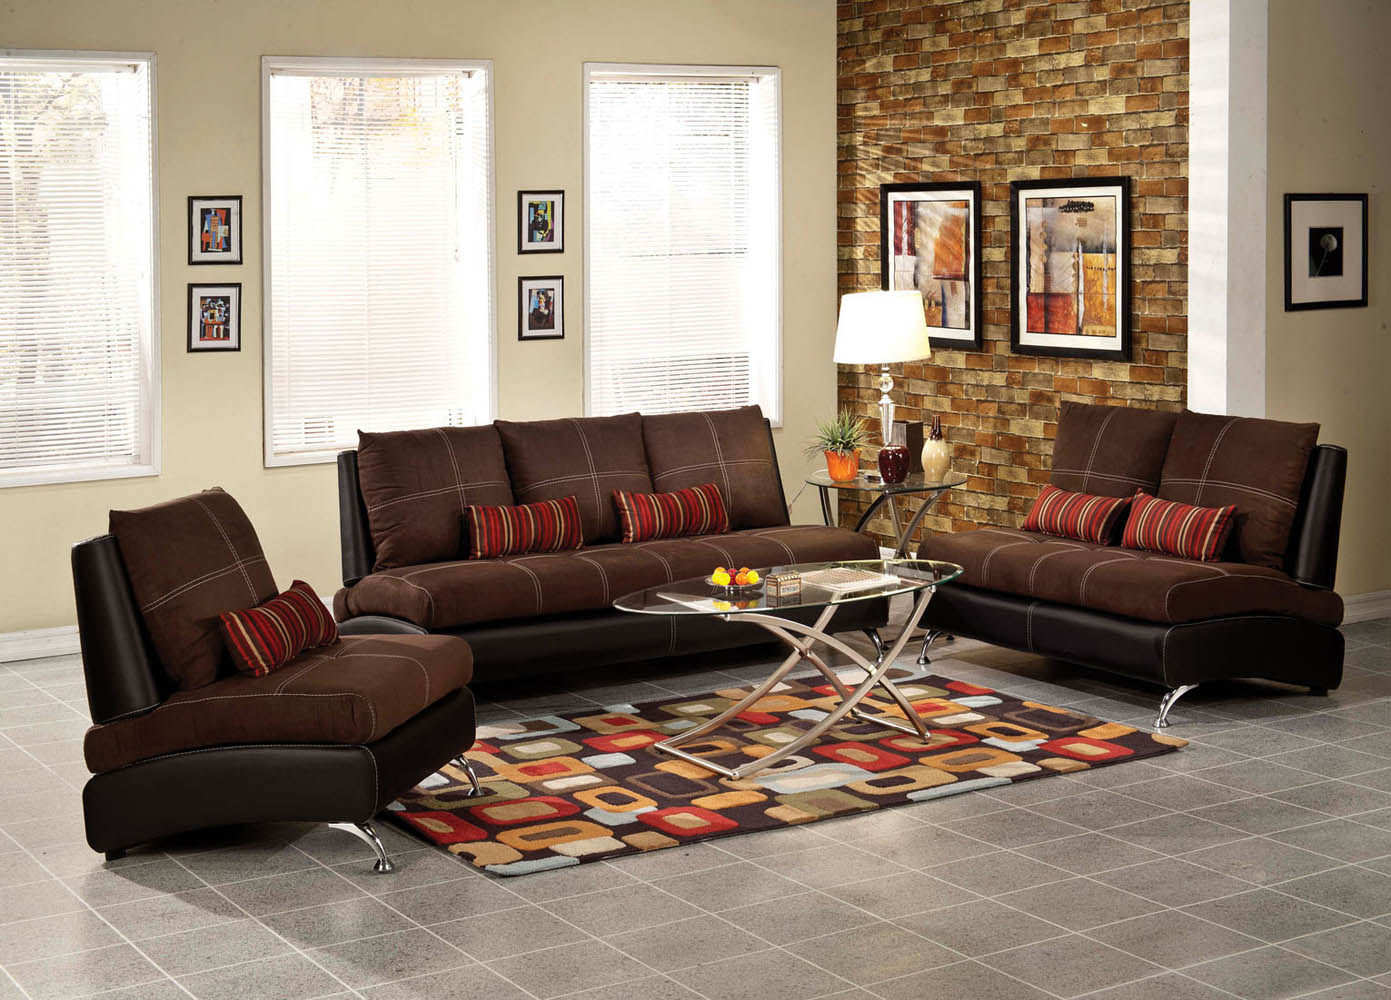 2 Piece Brown Suede Sofa Set Within Brown Sofa Set - Suede Sofa Set , HD Wallpaper & Backgrounds